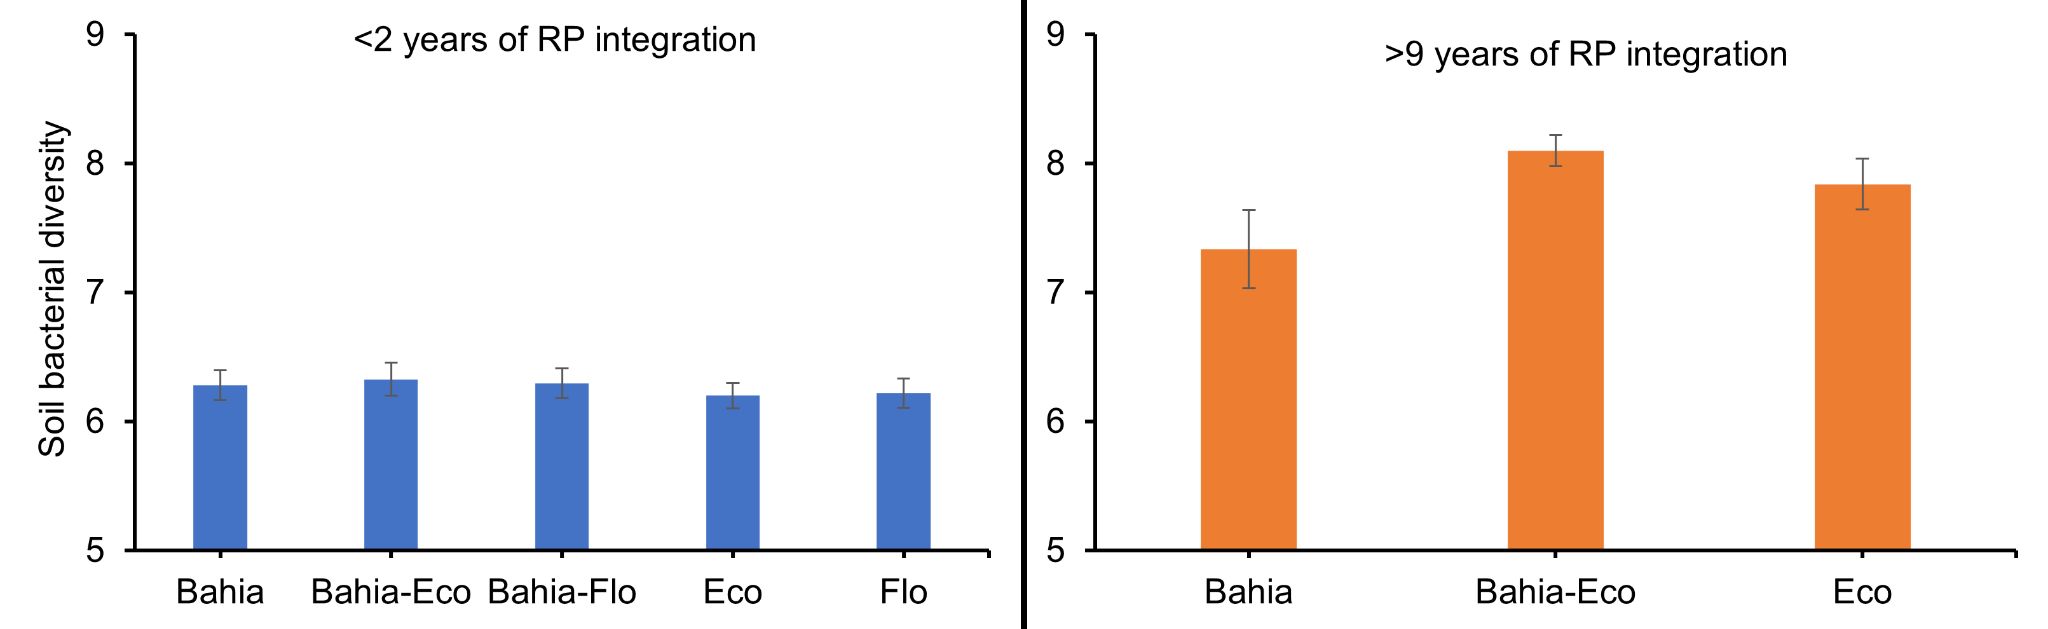 Soil bacterial diversity measured in different durations (i.e., under 2 years versus more than 9 years) of incorporation of RPP into bahiagrass pastures. Bahia: Bahiagrass monoculture; Bahia-Eco: Mixture of bahiagrass and Ecoturf RPP; Bahia-Flo: Mixture of bahiagrass and Florigraze RPP; Eco: Ecoturf RPP;Flo: Florigraze RPP.